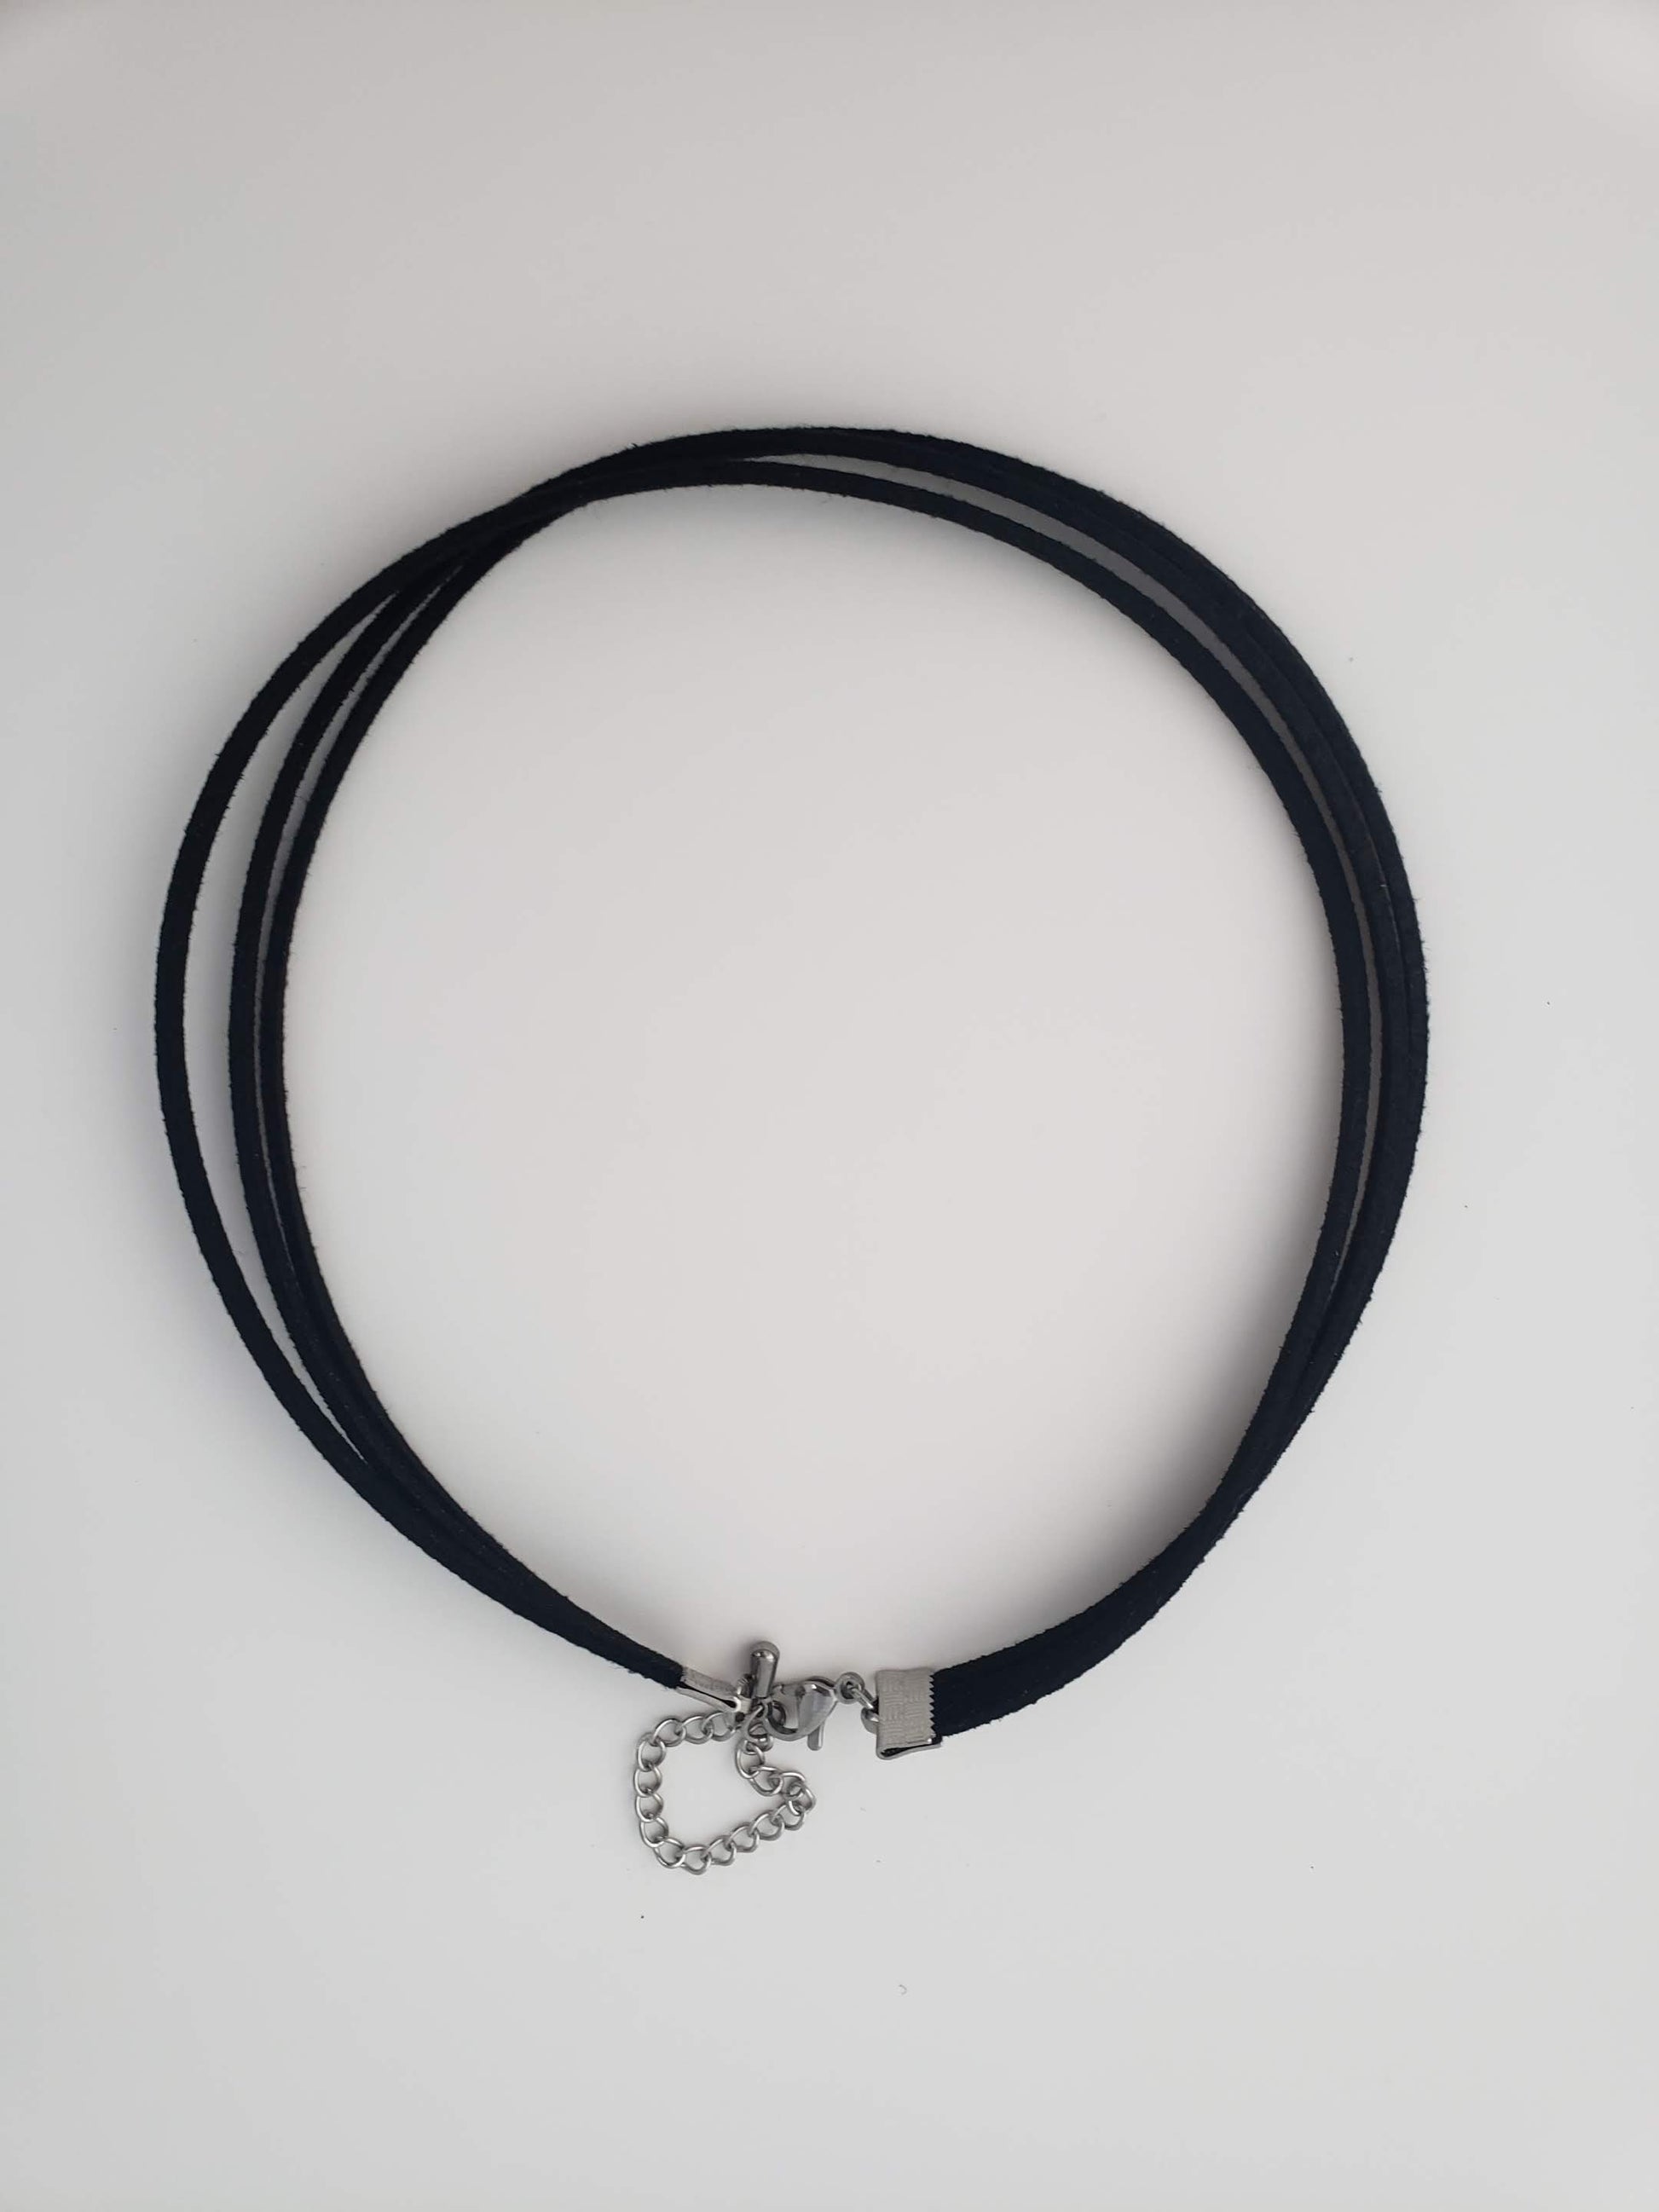 13" Stacked Faux Leather Choker on a white background